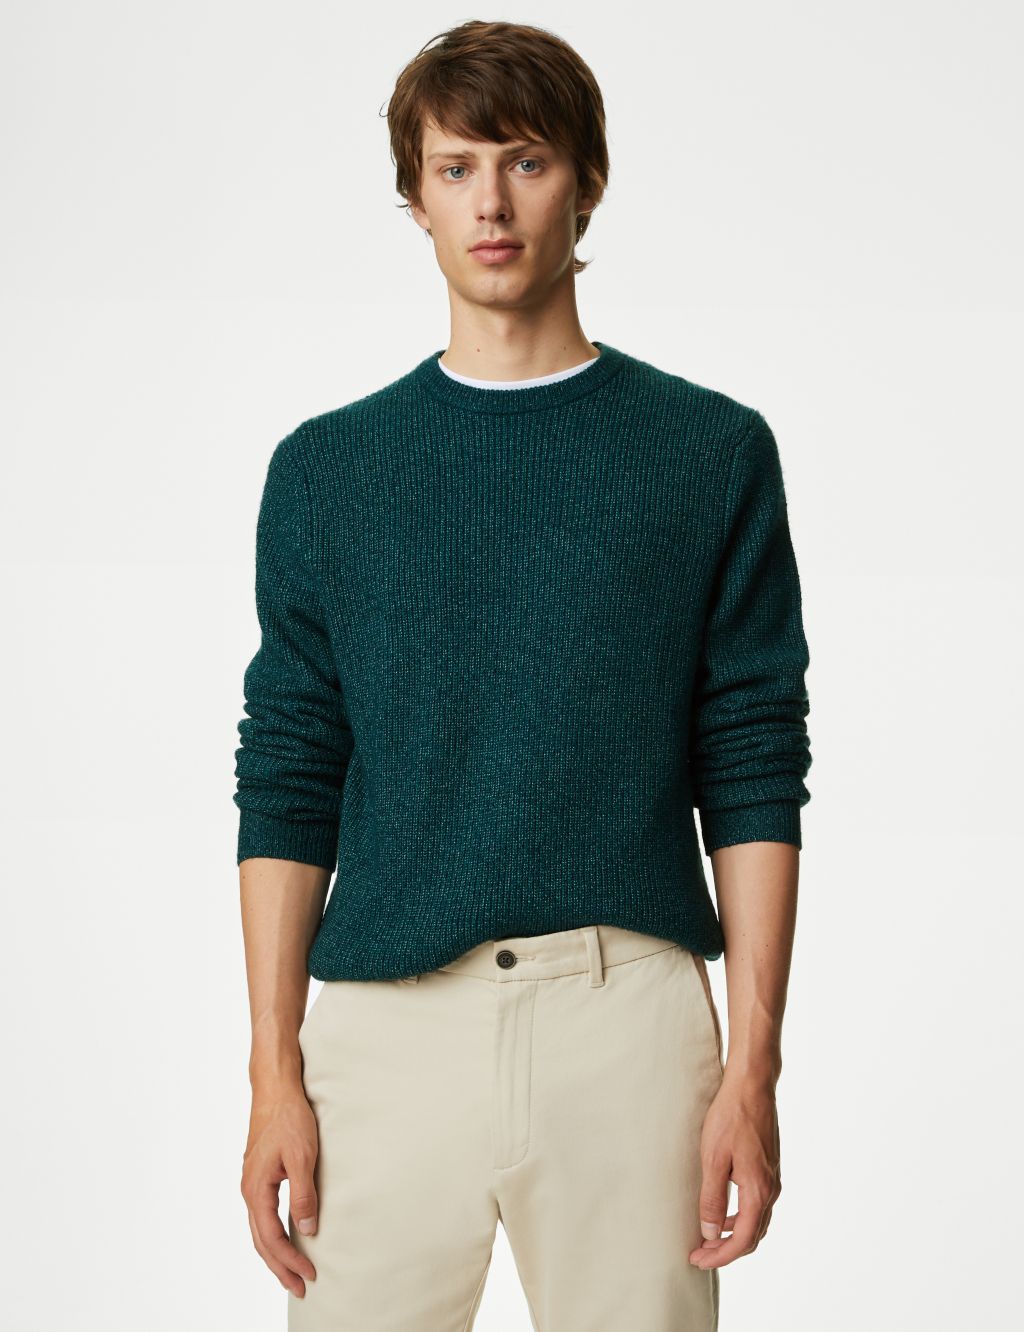 Supersoft Chunky Crew Neck Jumper image 1